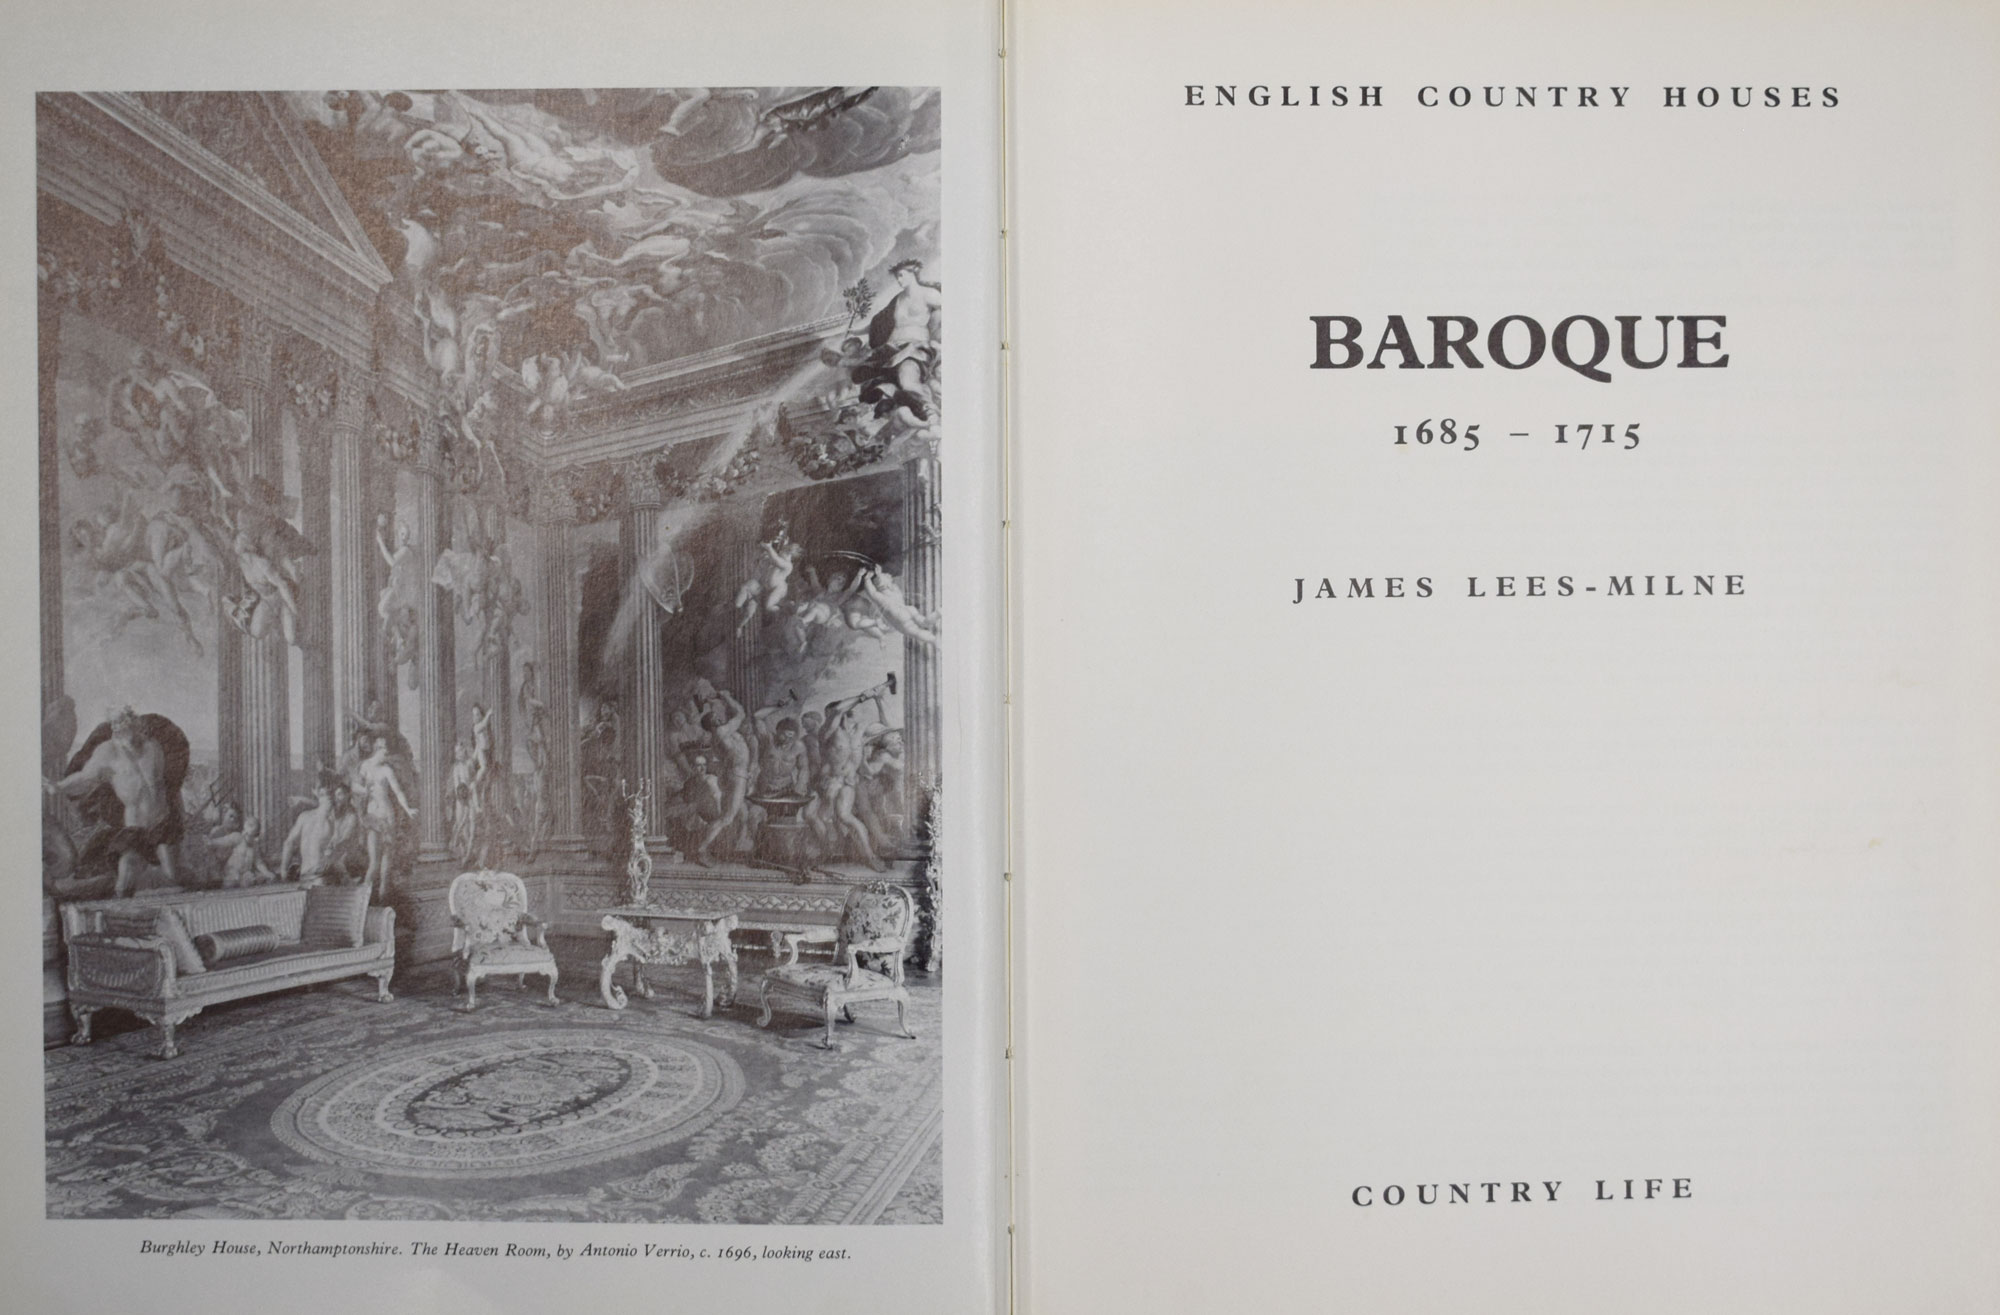 English Country Houses: Baroque 1685-1715.